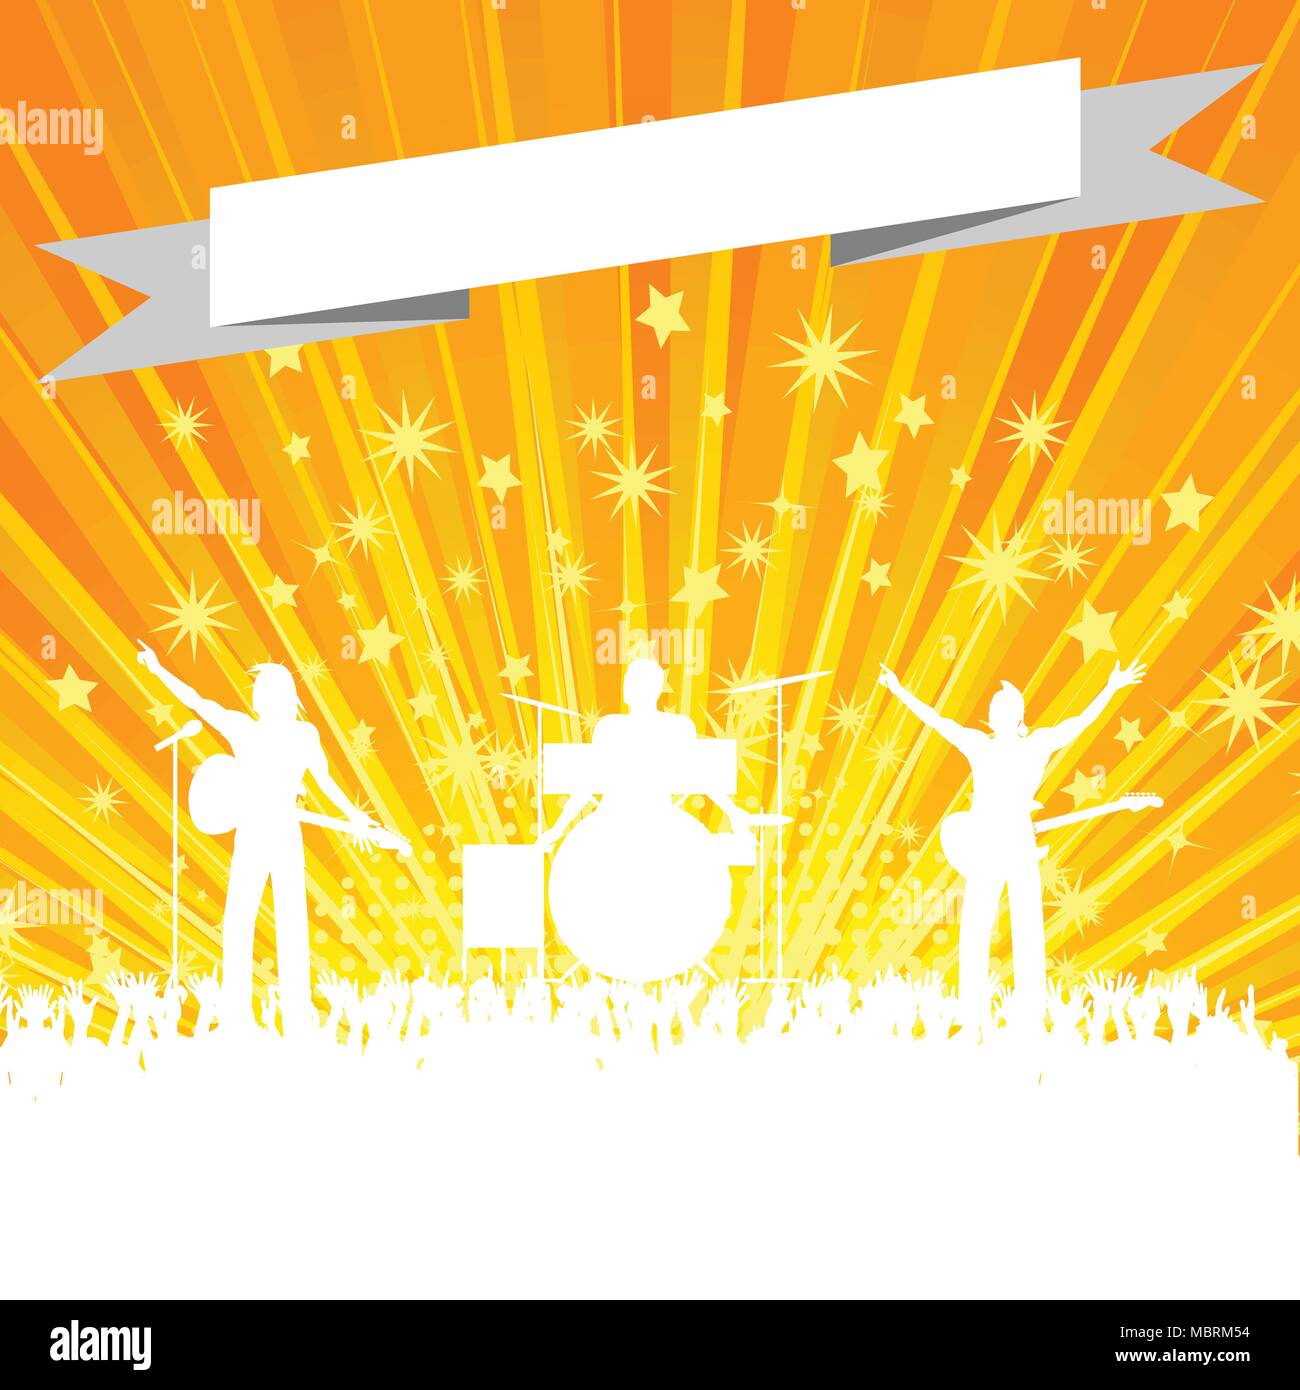 Music Band White Silhouette with Crowd and Blank Banner Over Yellow Star Burst Background Stock Vector